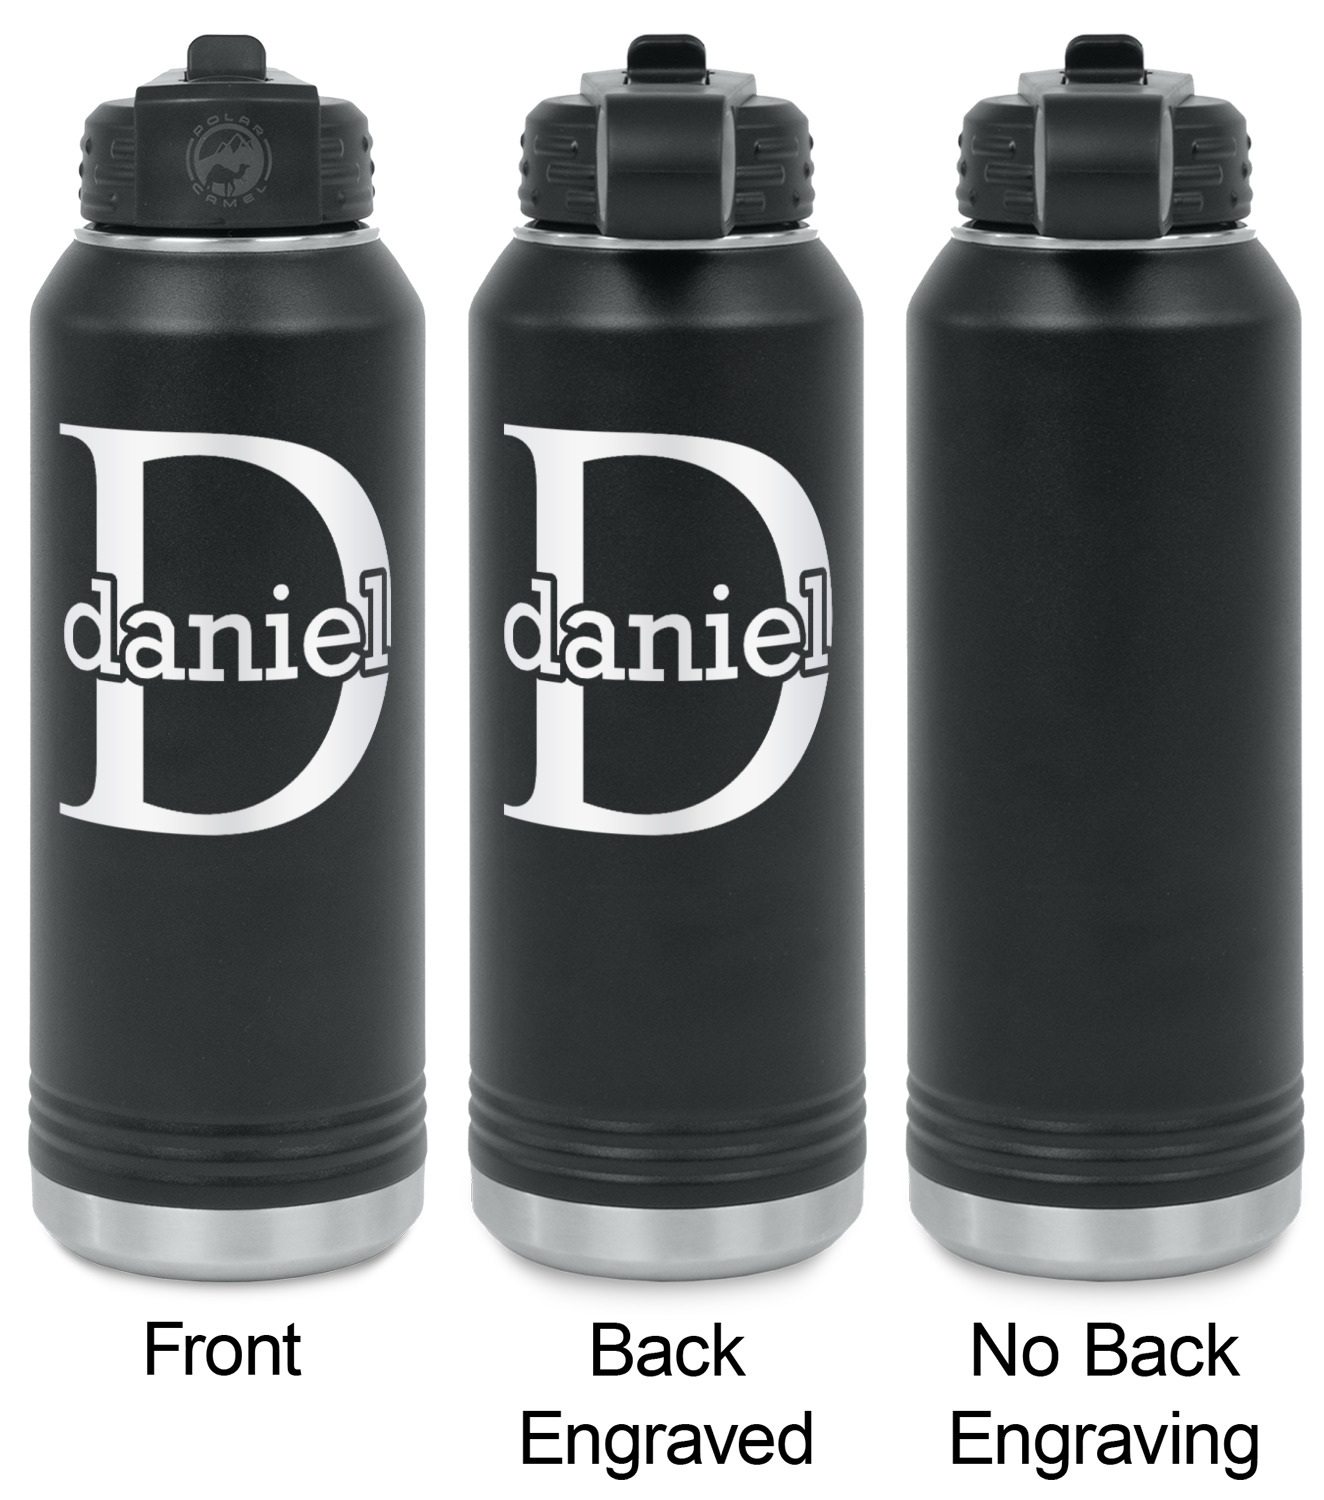 https://www.youcustomizeit.com/common/MAKE/837778/Name-Initial-for-Guys-Laser-Engraved-Water-Bottles-2-Styles-Front-Back-View.jpg?lm=1666016999